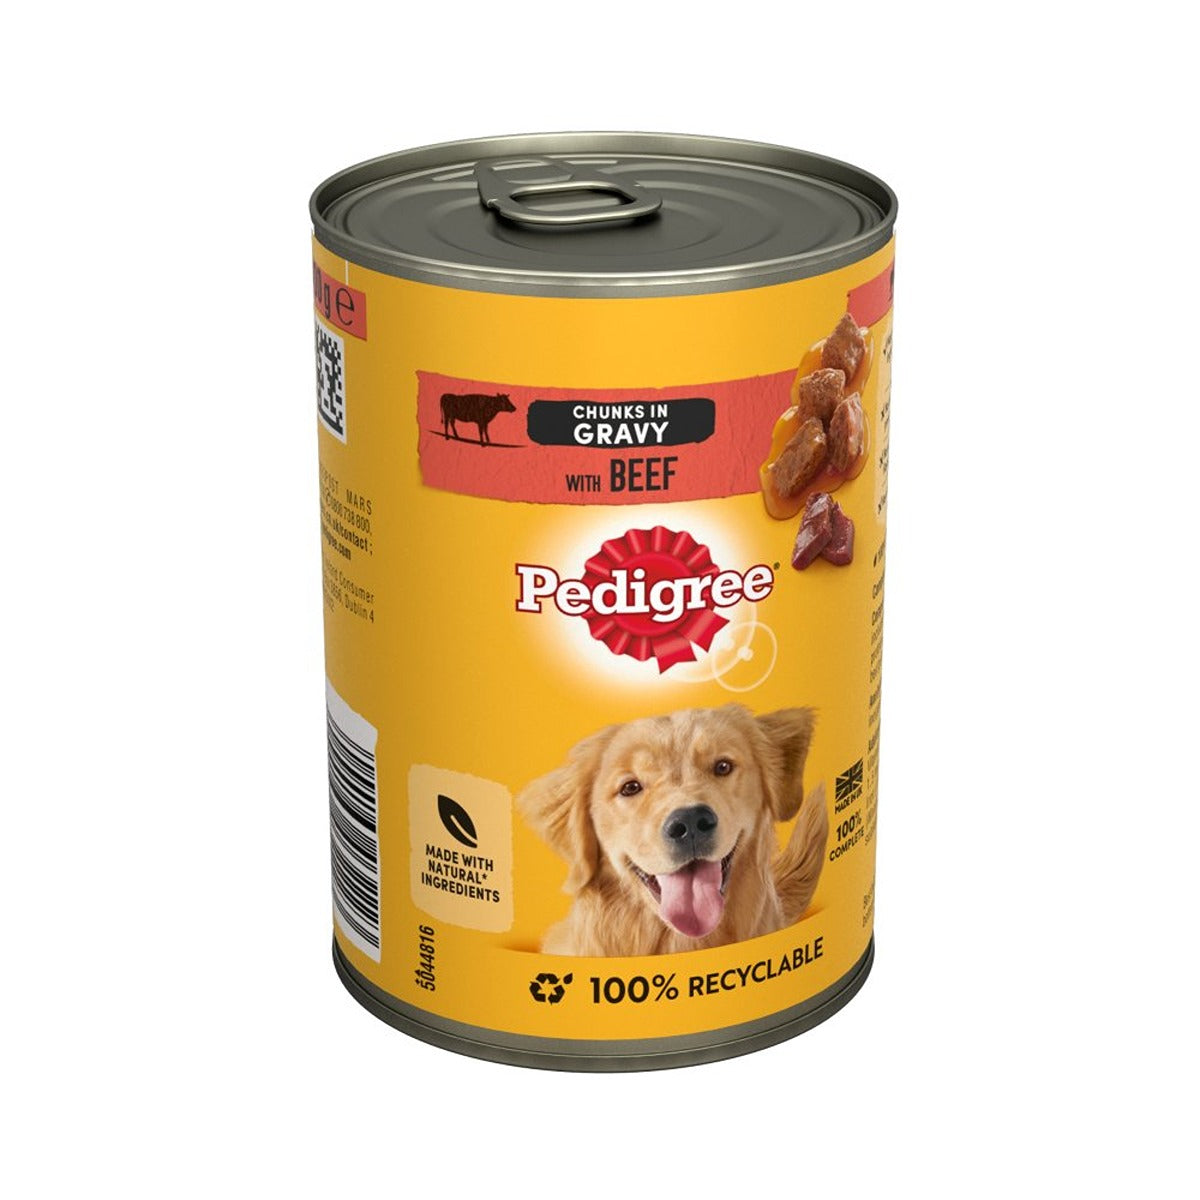 Pedigree - Chunks in Gravy Beef - 400g - Continental Food Store